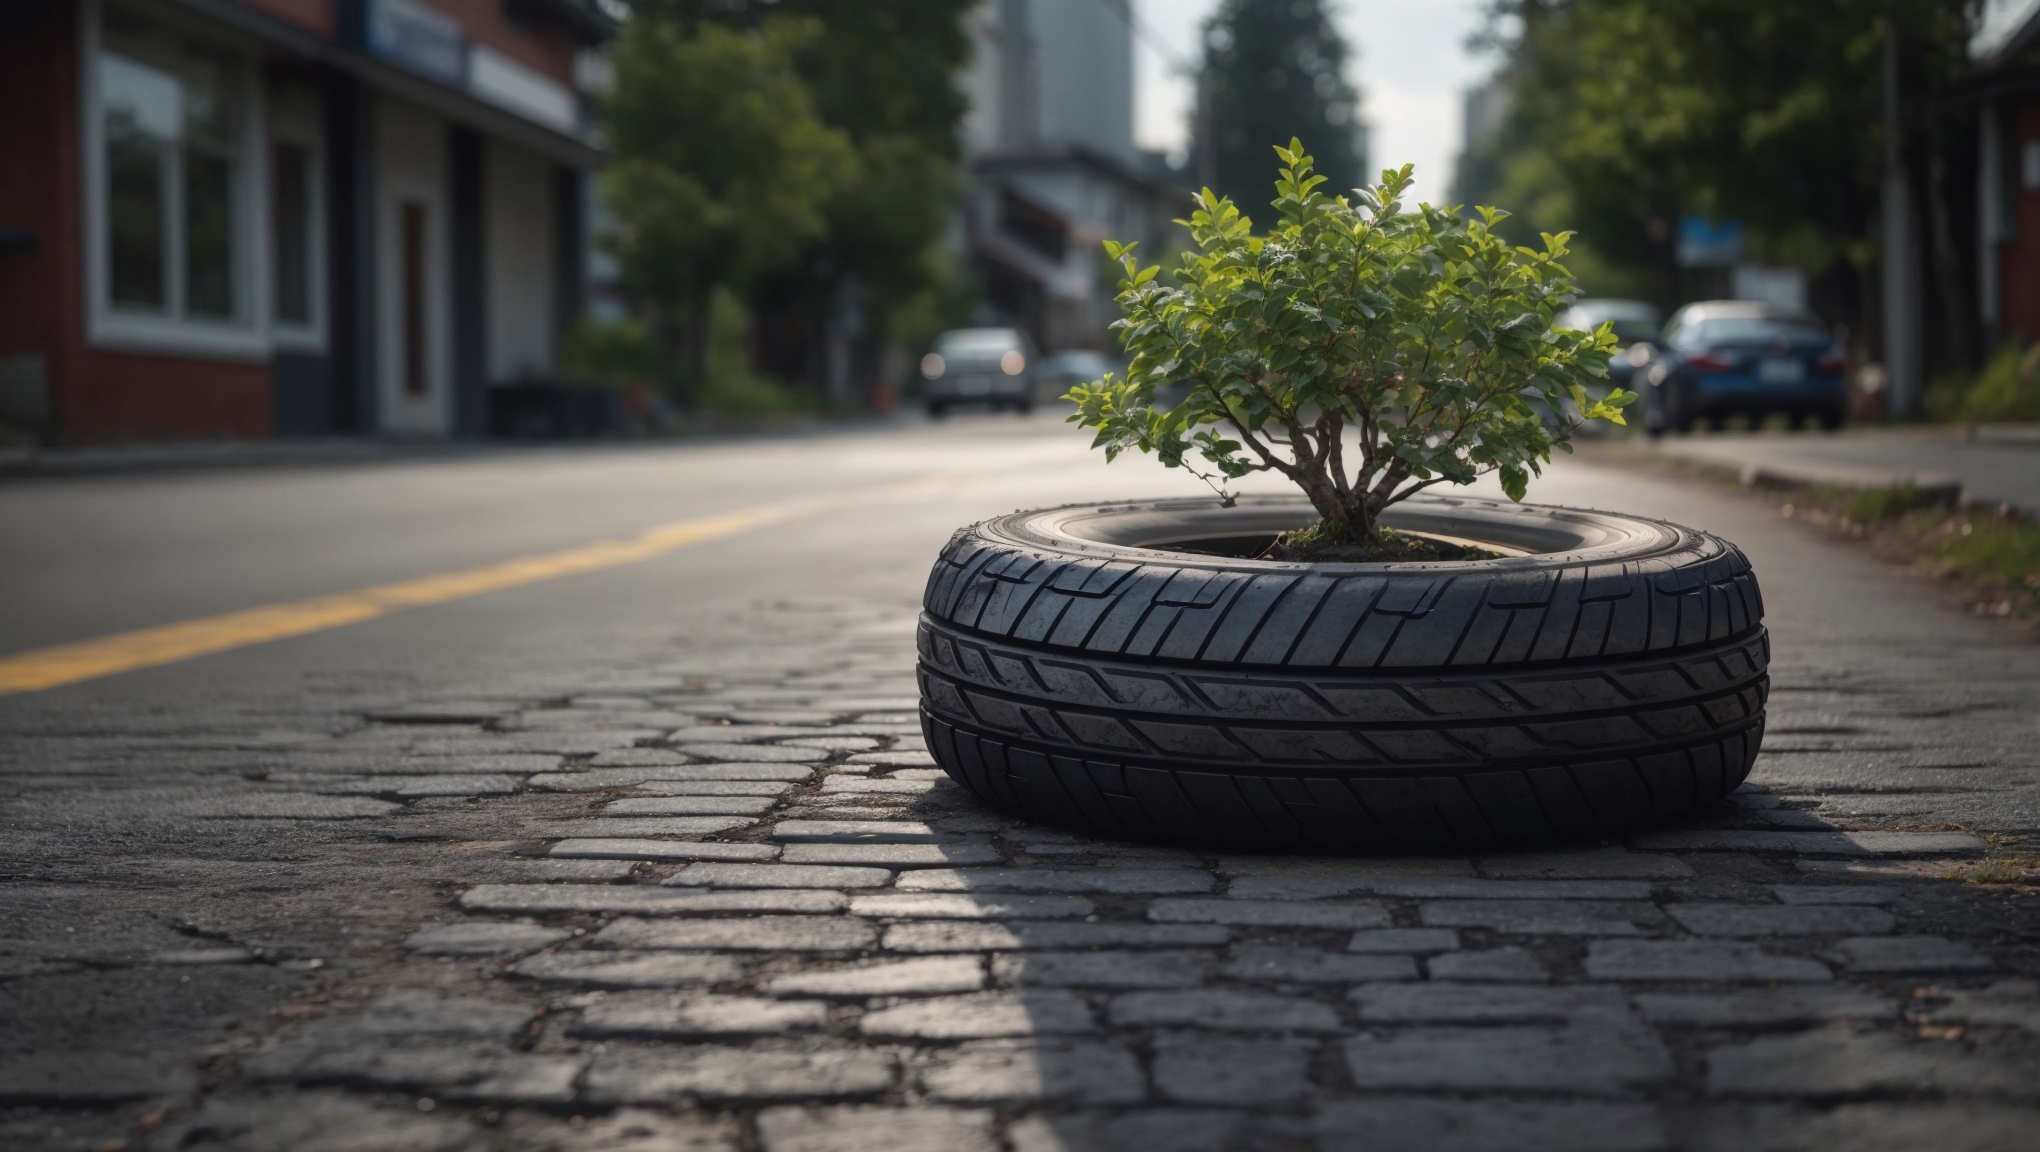 A_tree_growing_from_within_a_tire